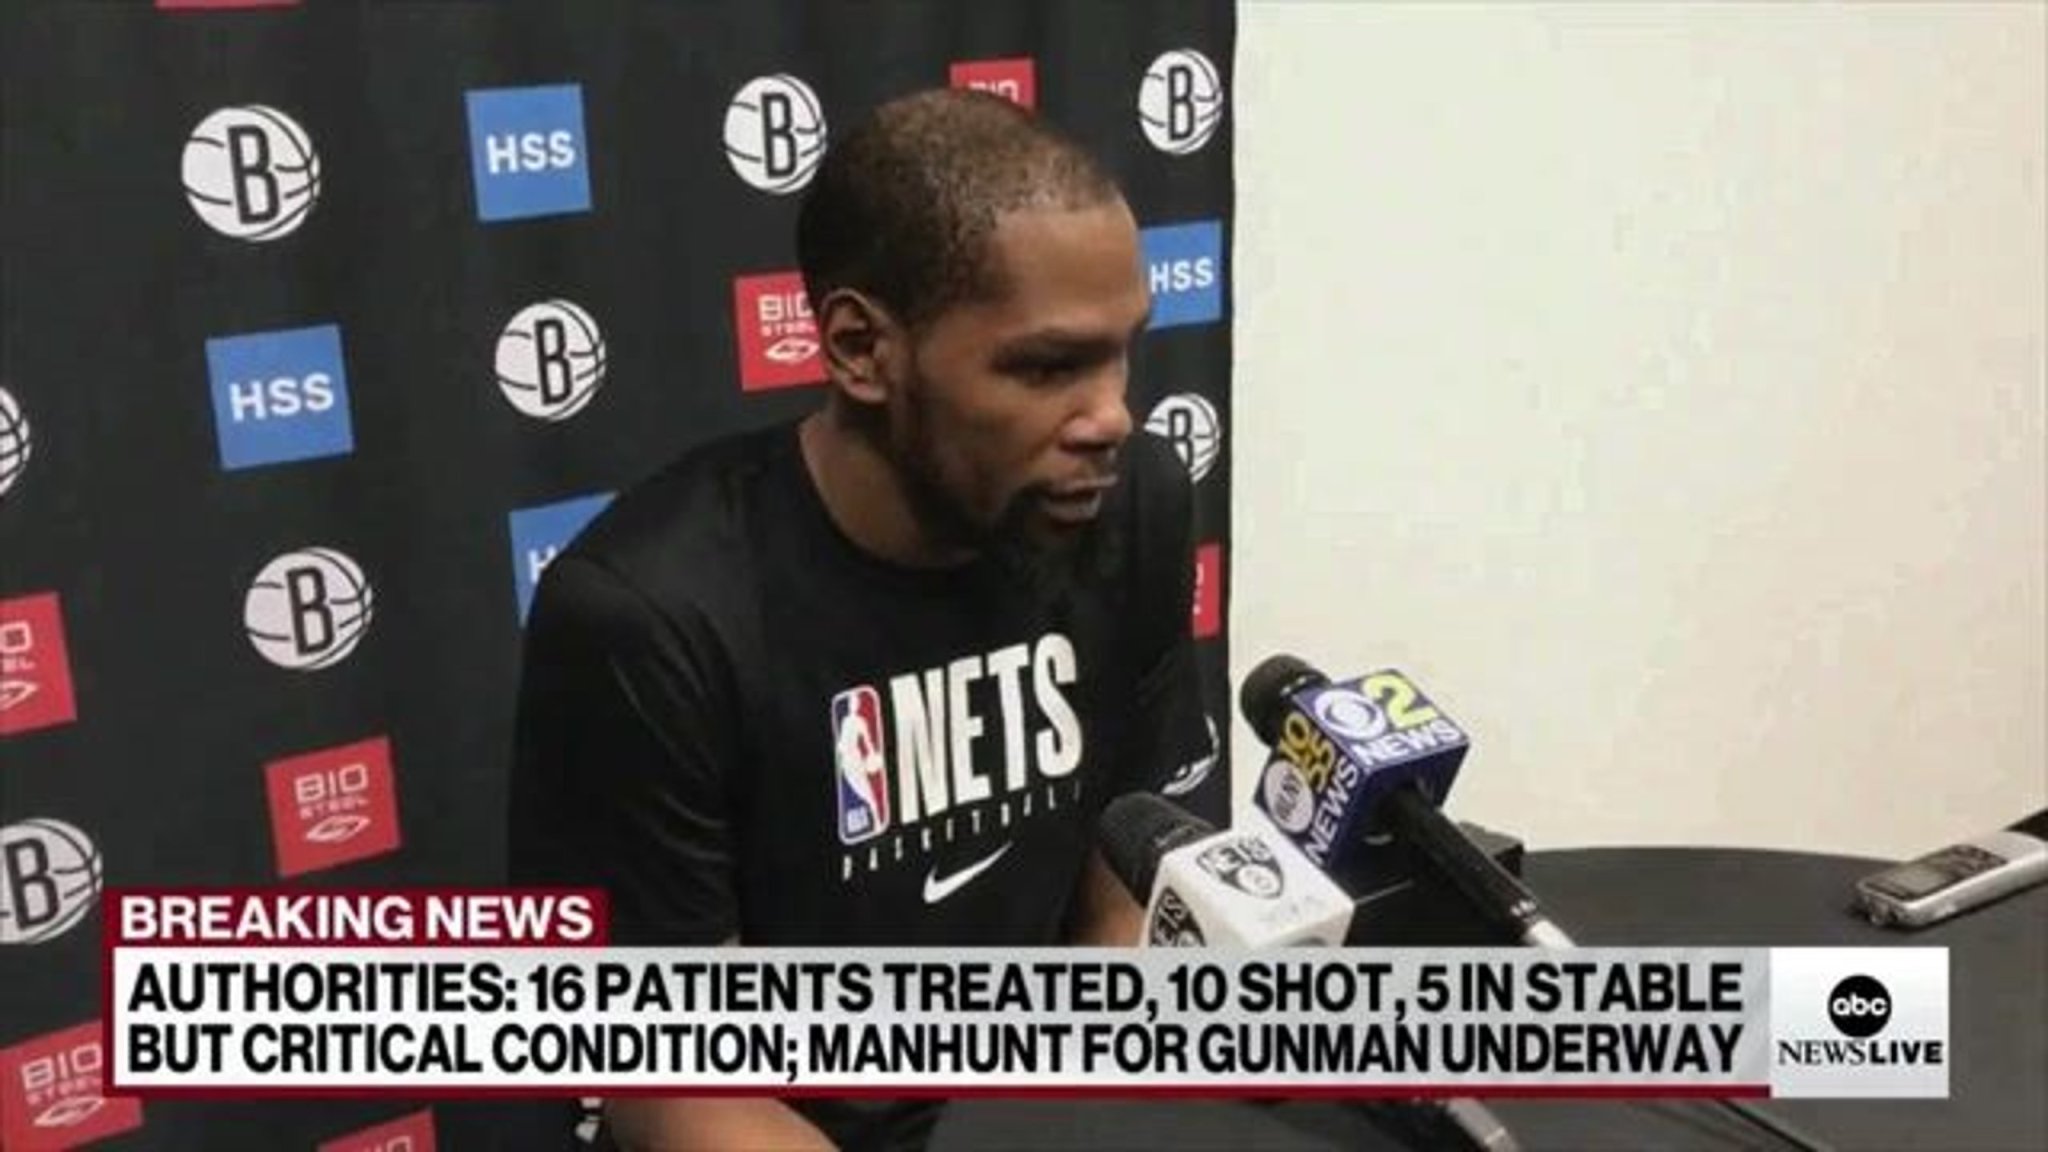 Brooklyn Nets player Kevin Durant responds to Tuesday's attacks in NYC: "You hope and pray for the best for everybody."